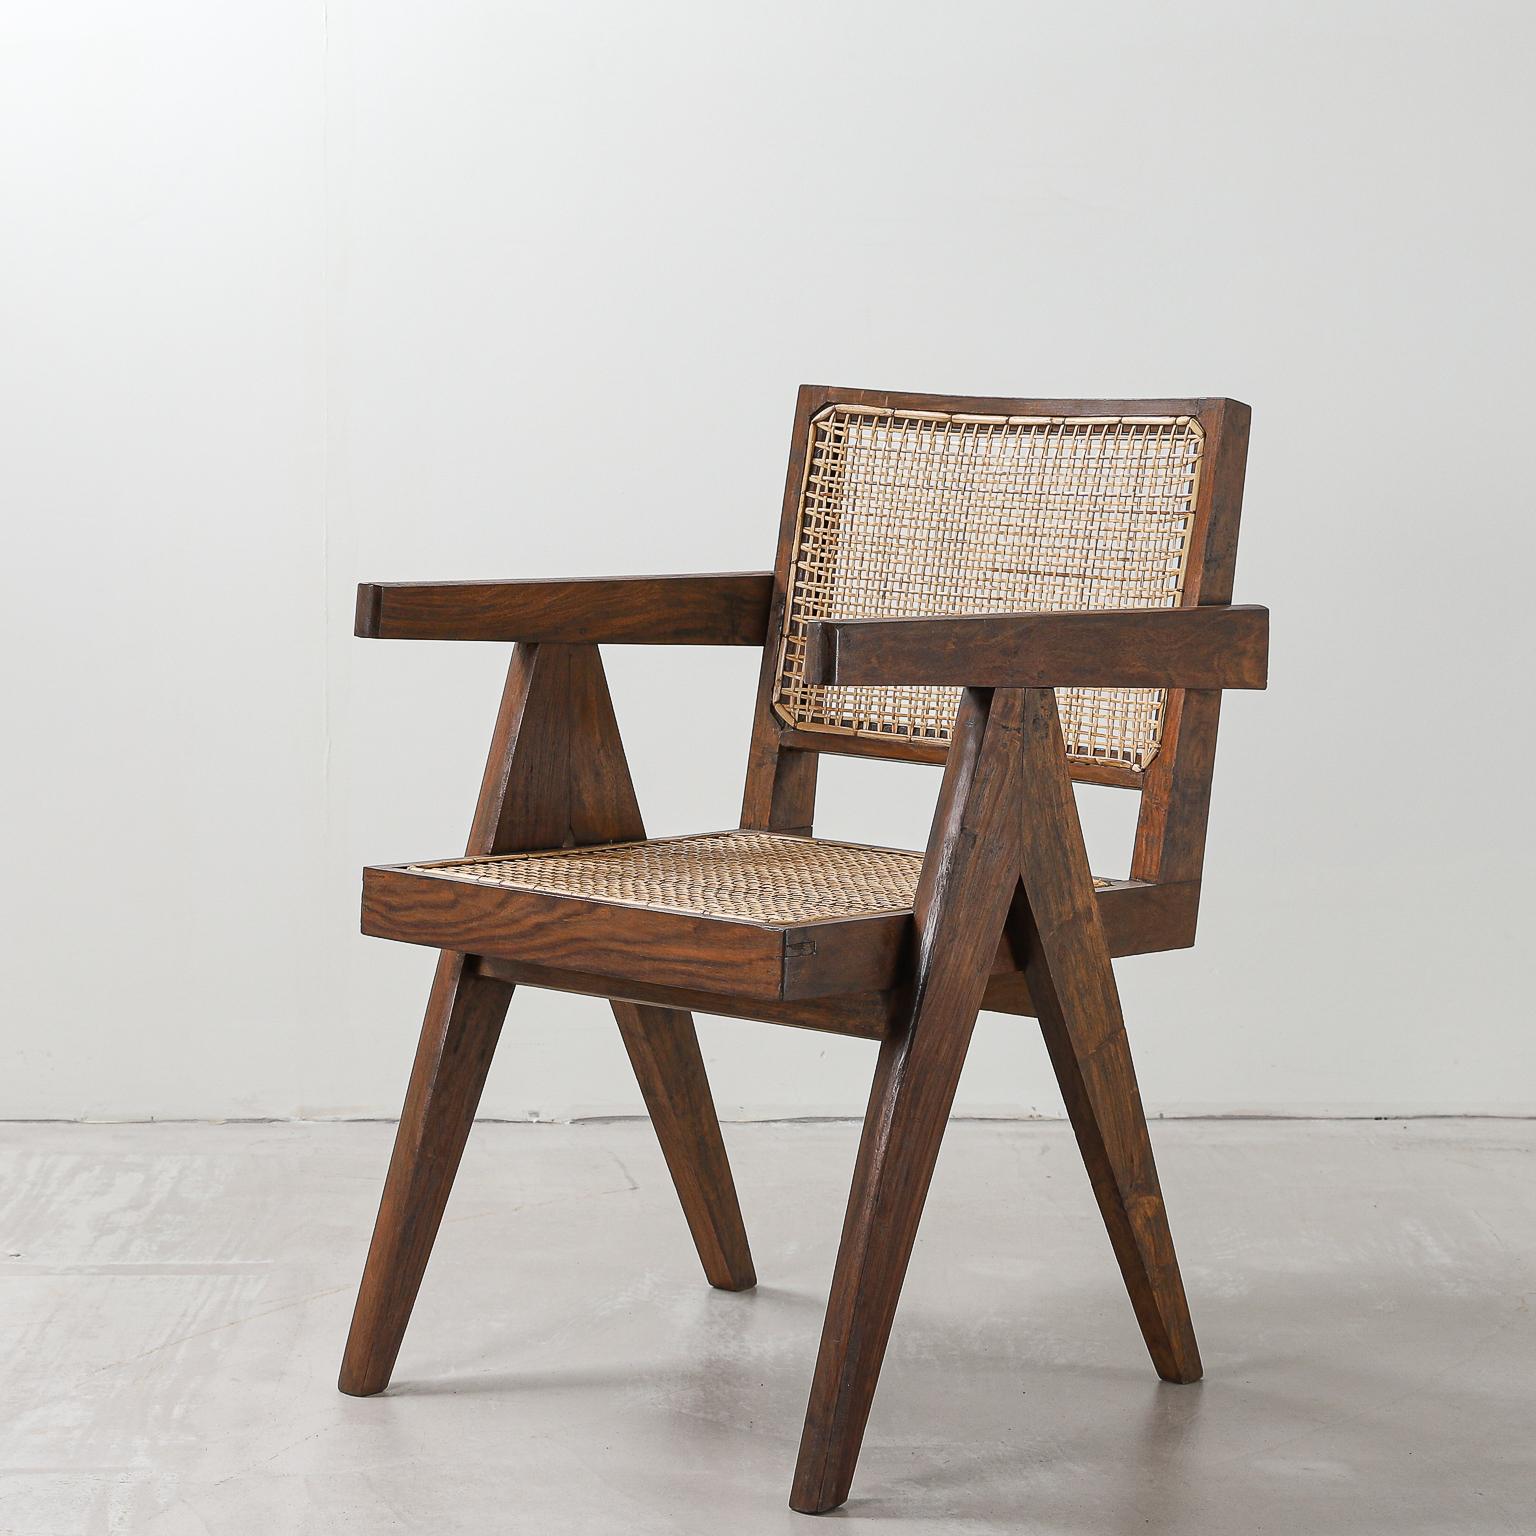 Set of 6 Pierre Jeanneret Office Chair, Variant, circa 1953-1954 In Good Condition In London, Charterhouse Square